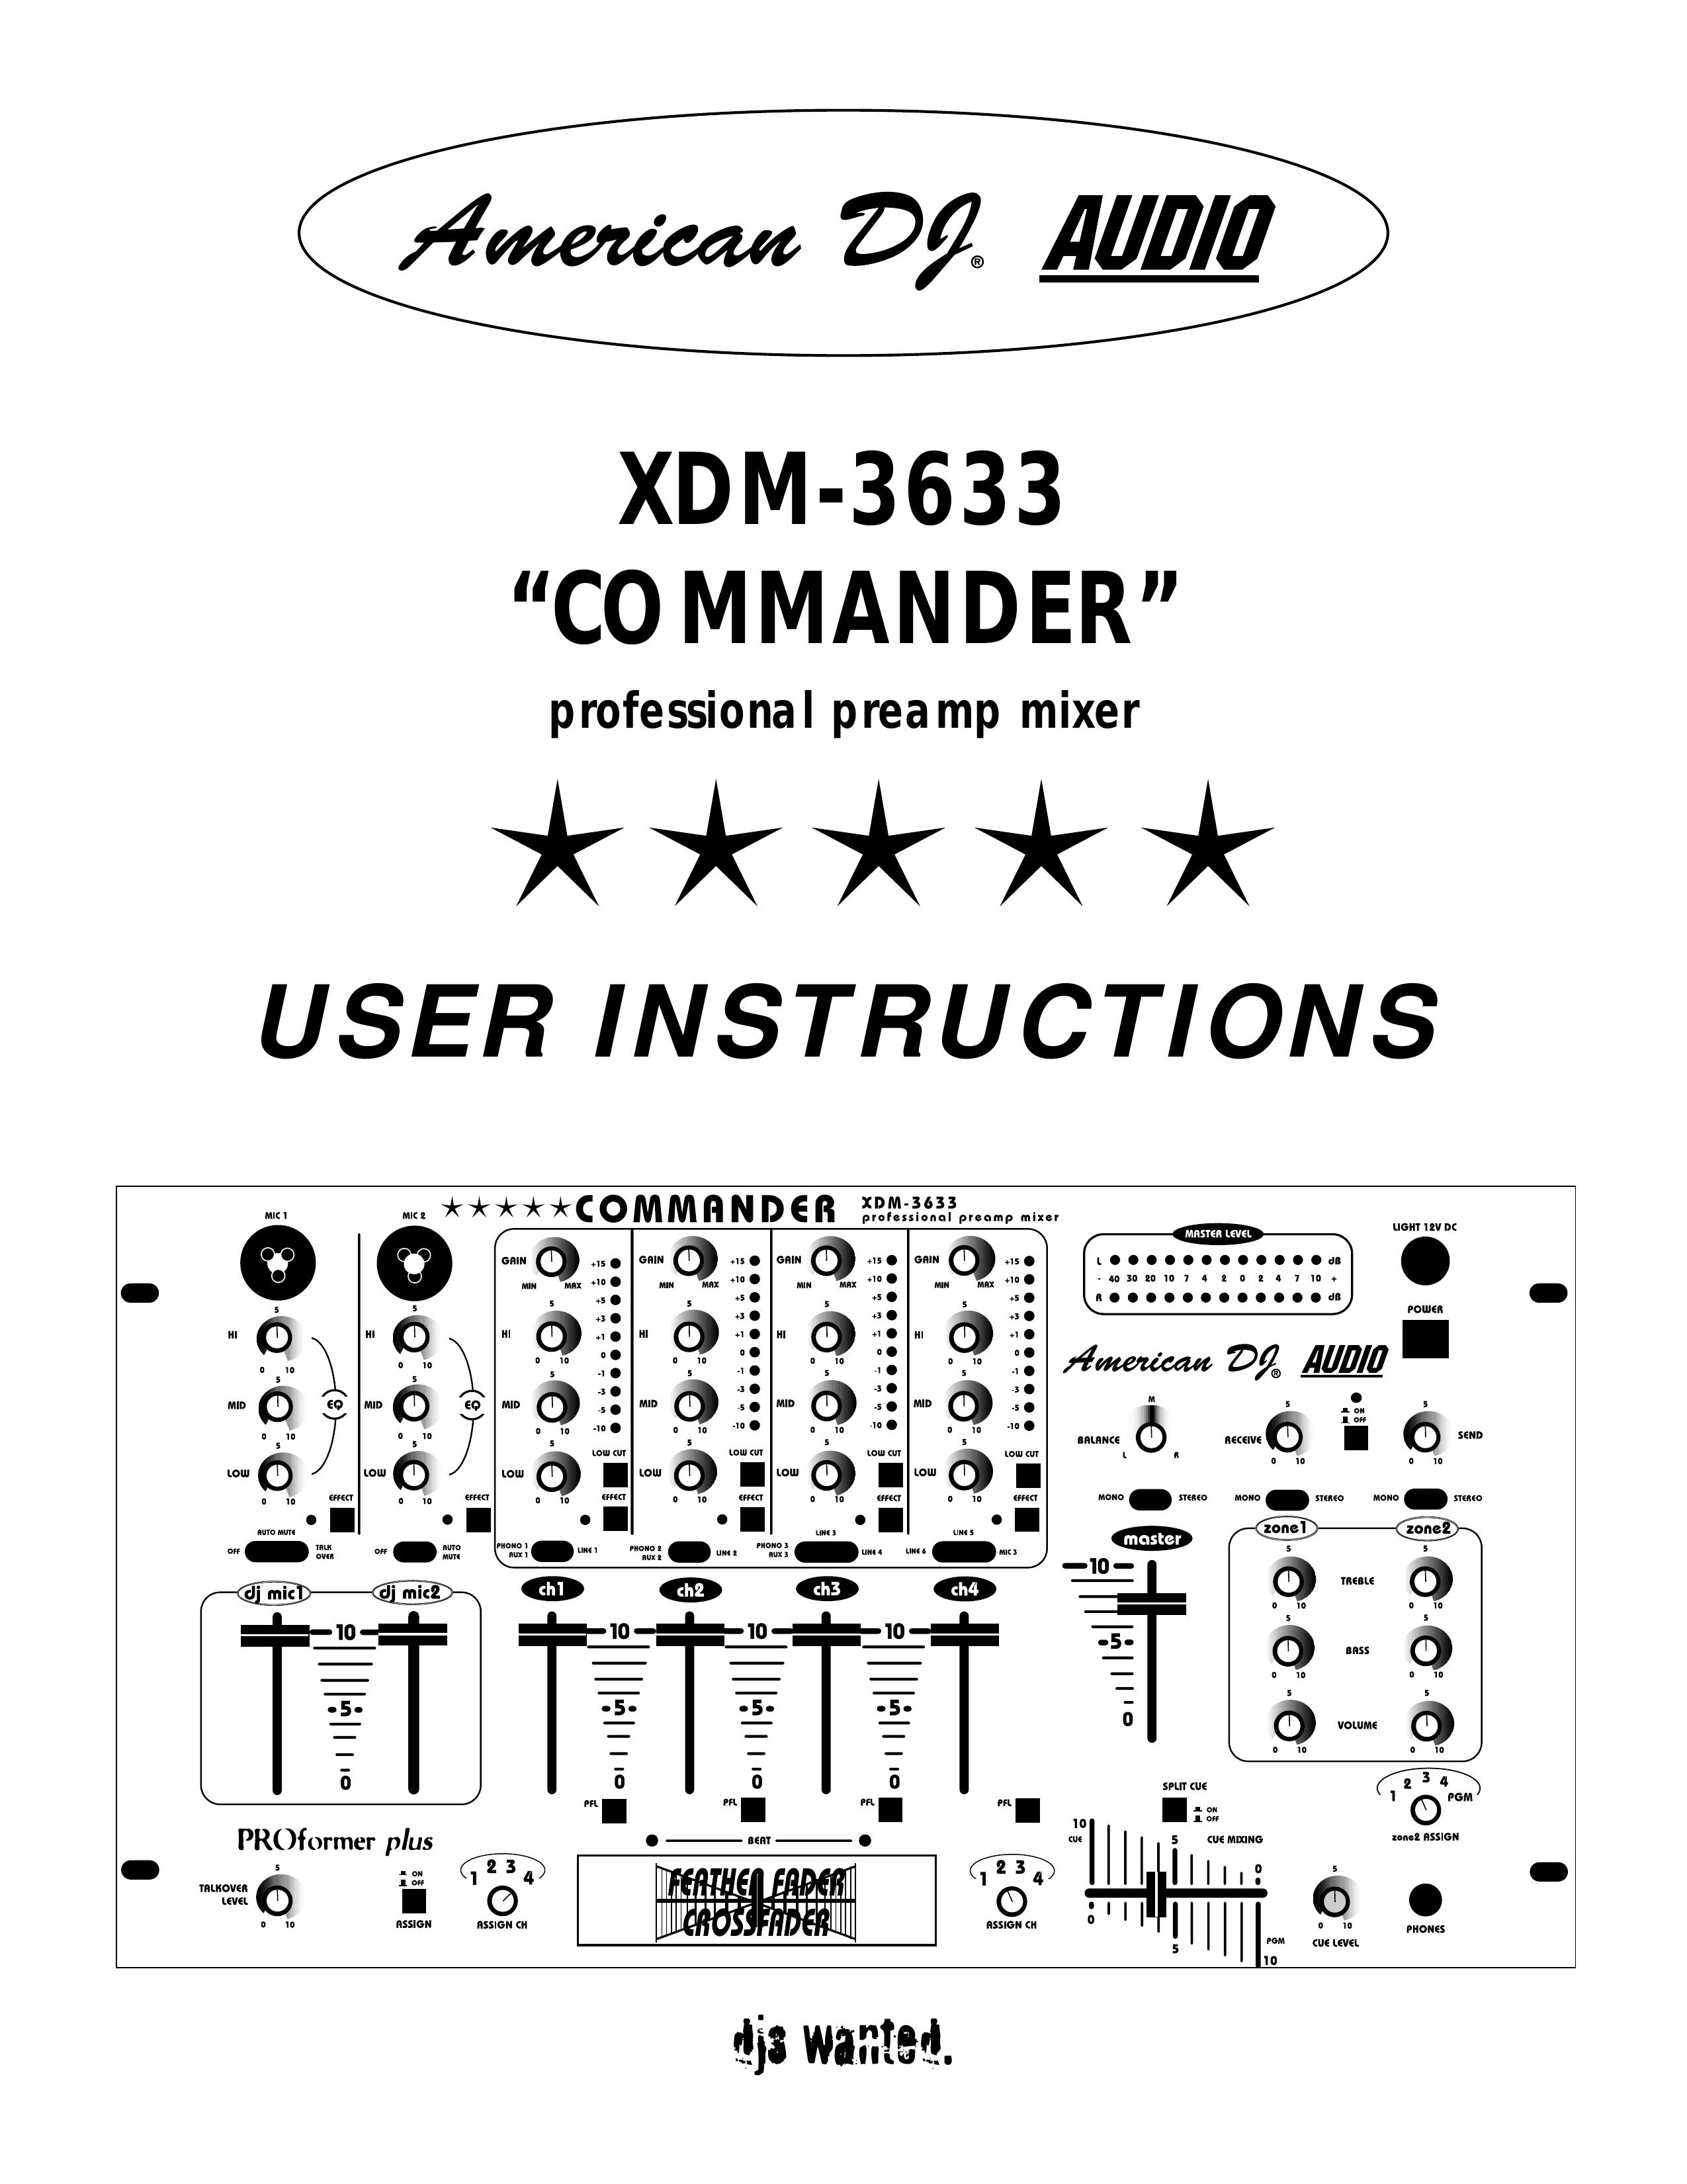 American Audio XDM-3633 Musical Instrument User Manual (Page 1)